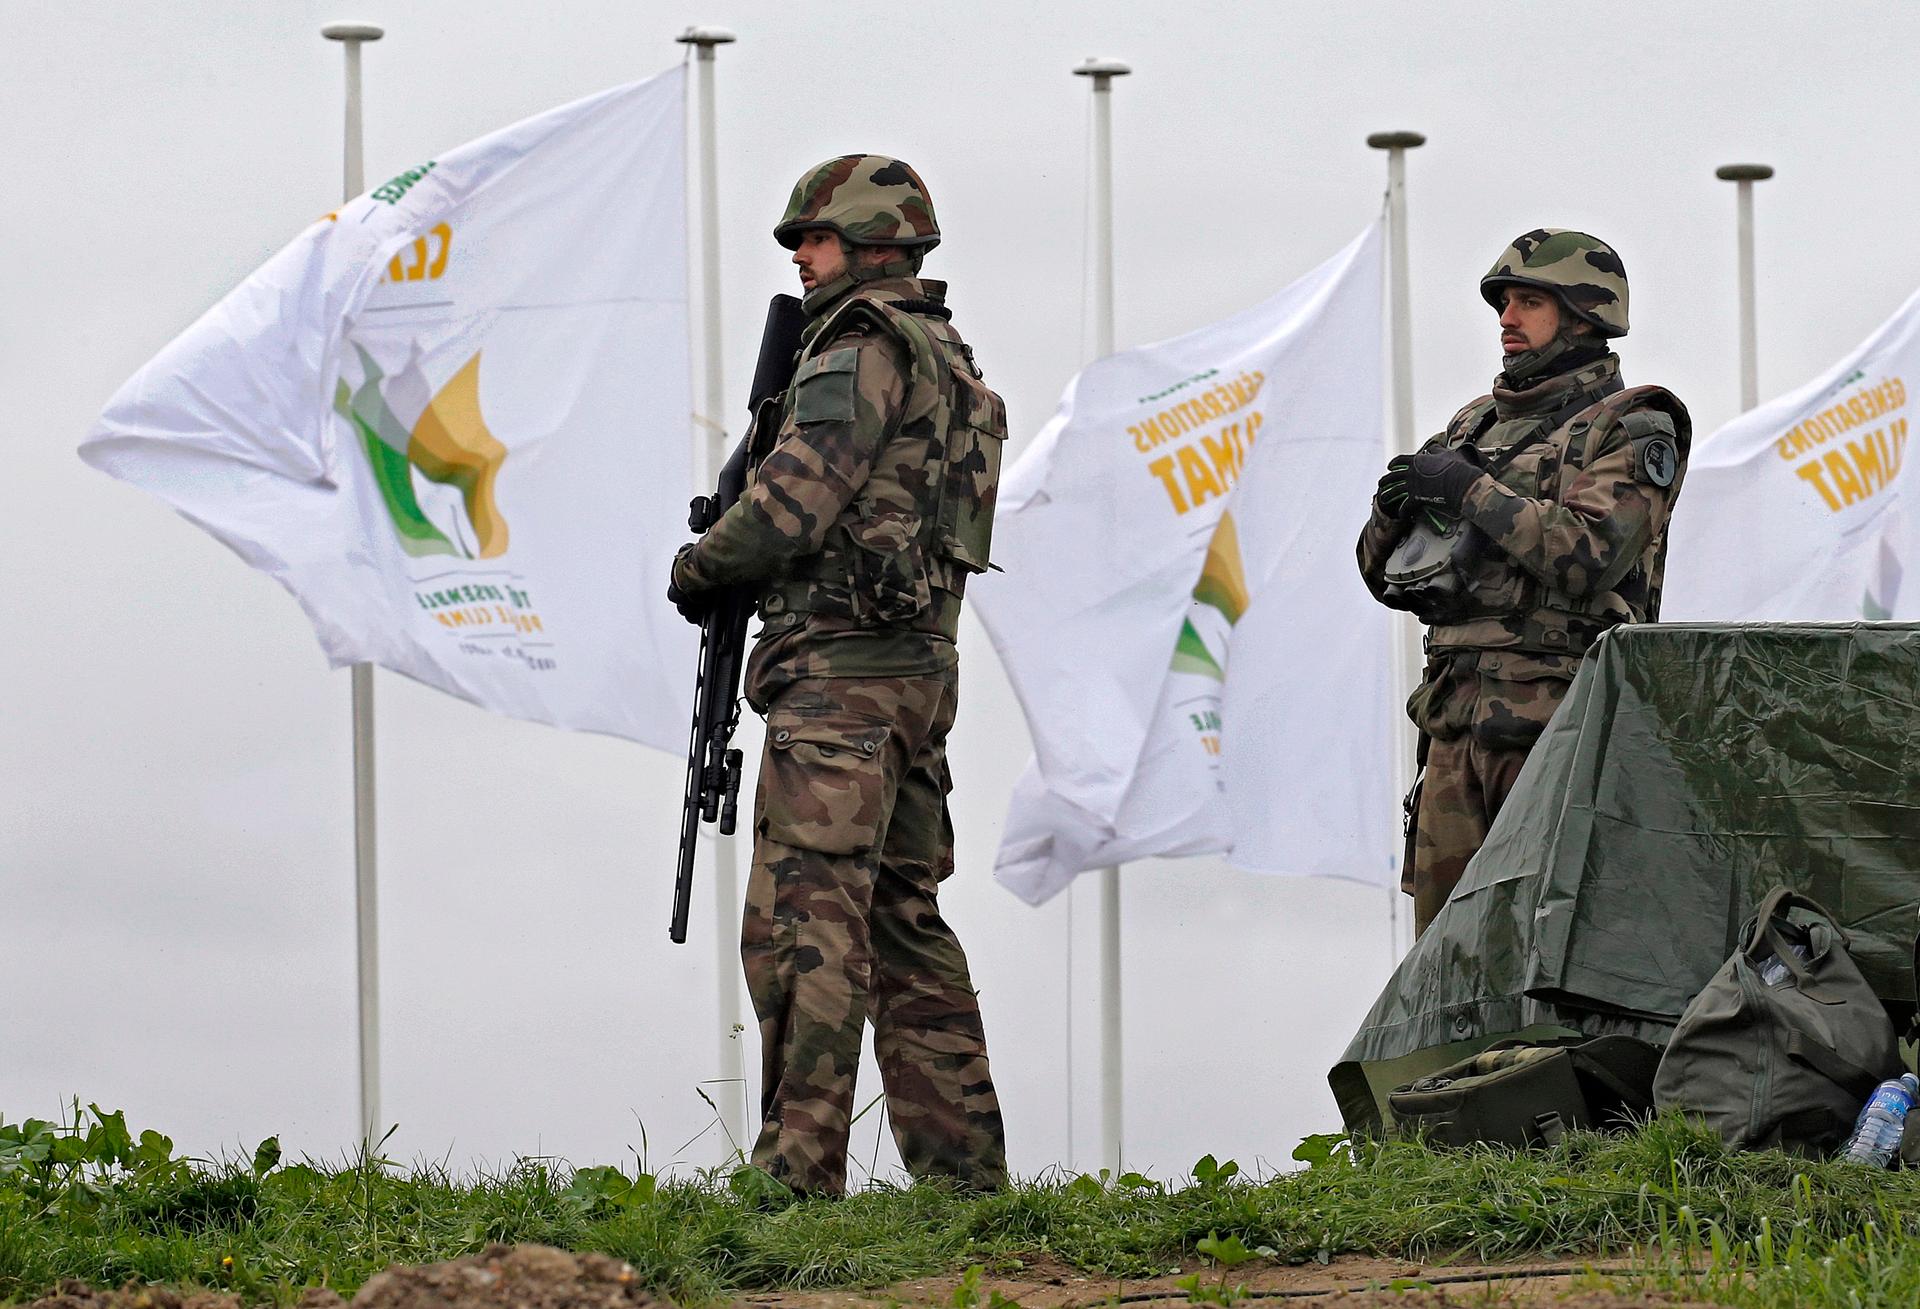 French soldiers stand on the site as tight security continues during the World Climate Change Conference 2015 (COP21).